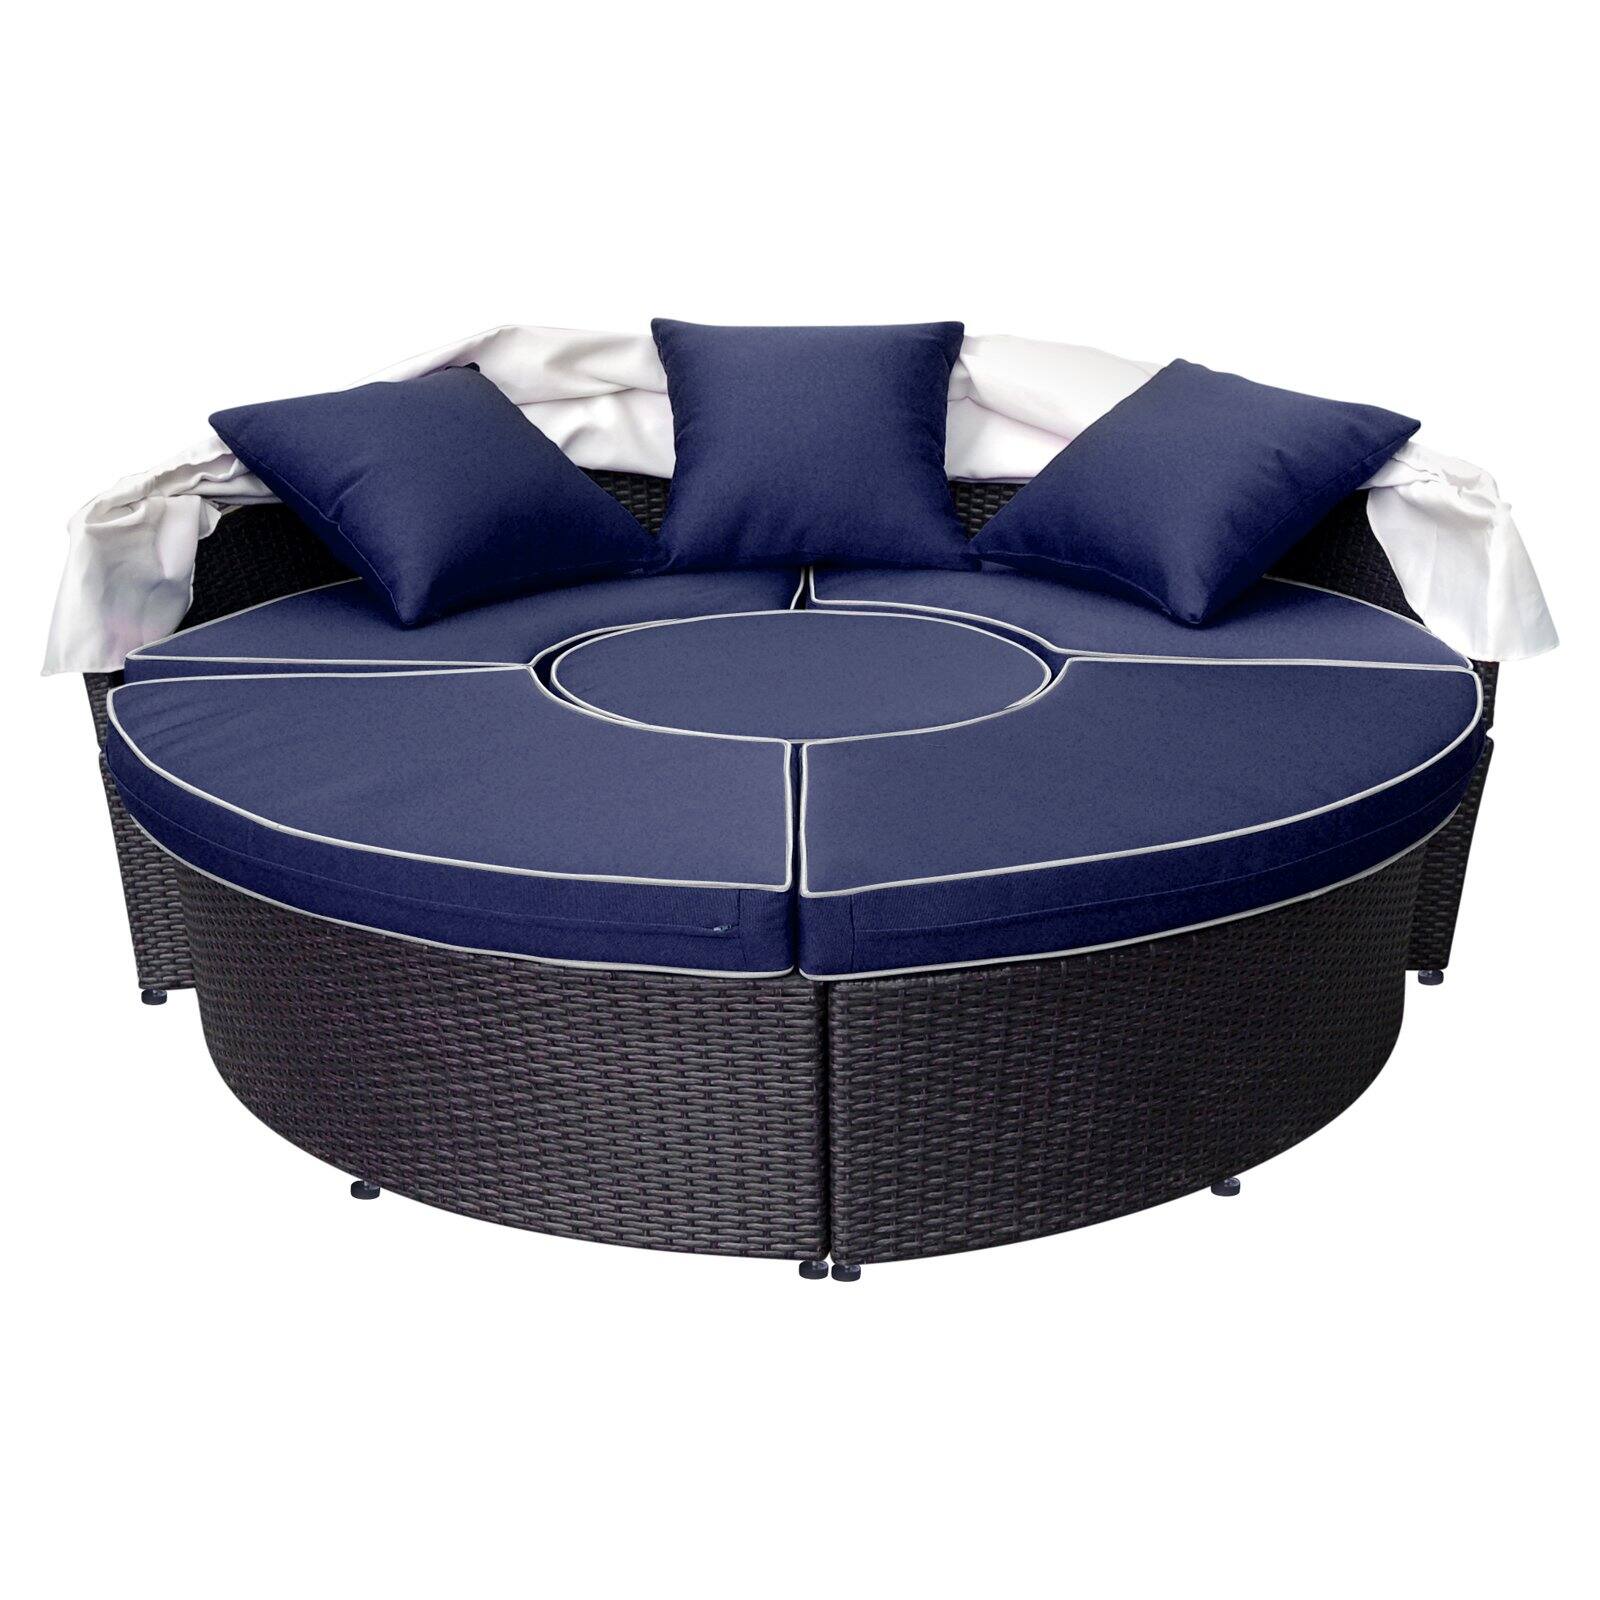 Jeco All-Weather Wicker Sectional Patio Daybed with Cushion - image 4 of 8